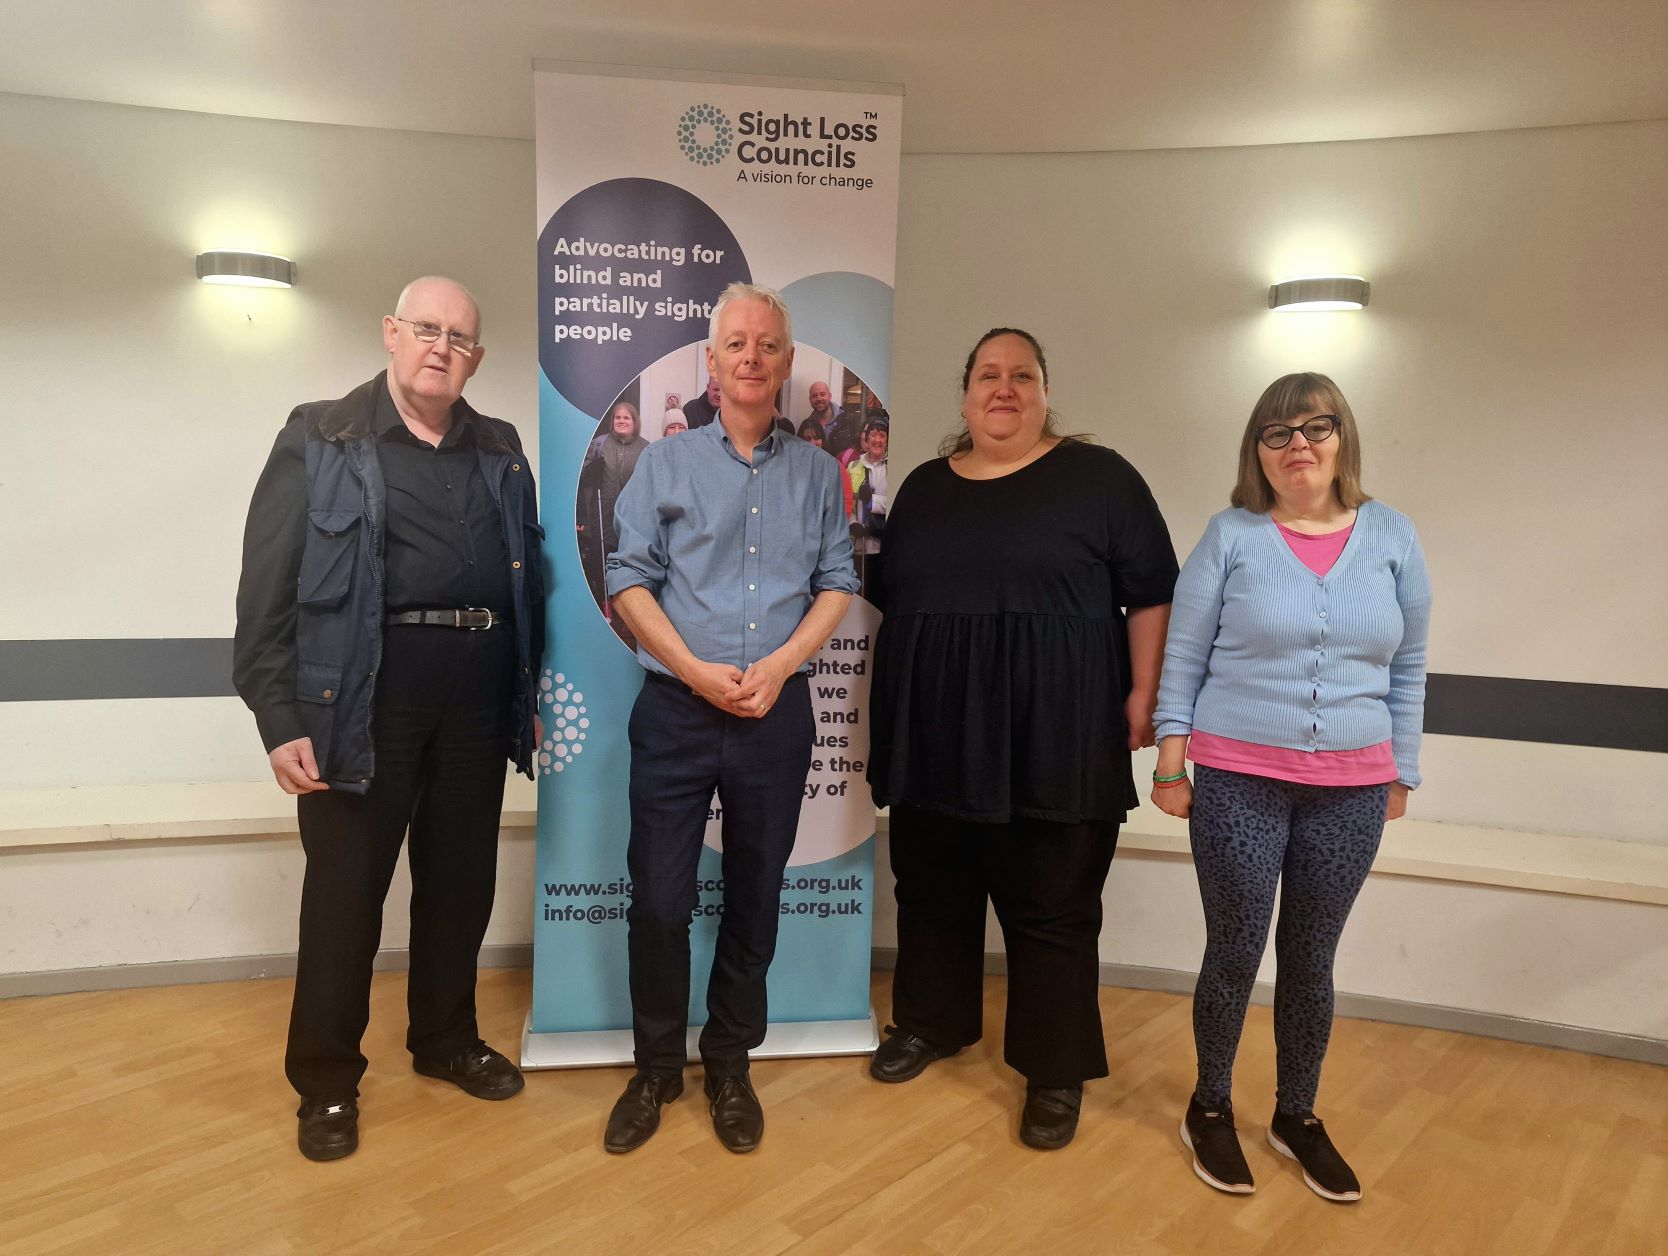 Image shows three Sight Loss Council (SLC) members with Engagement Manager Eamonn at the event, stood infront of a Sight Loss Council banner. Left to right: SLC member Martin, Engagement Manager Eamonn, and SLC members Hazel and Toni